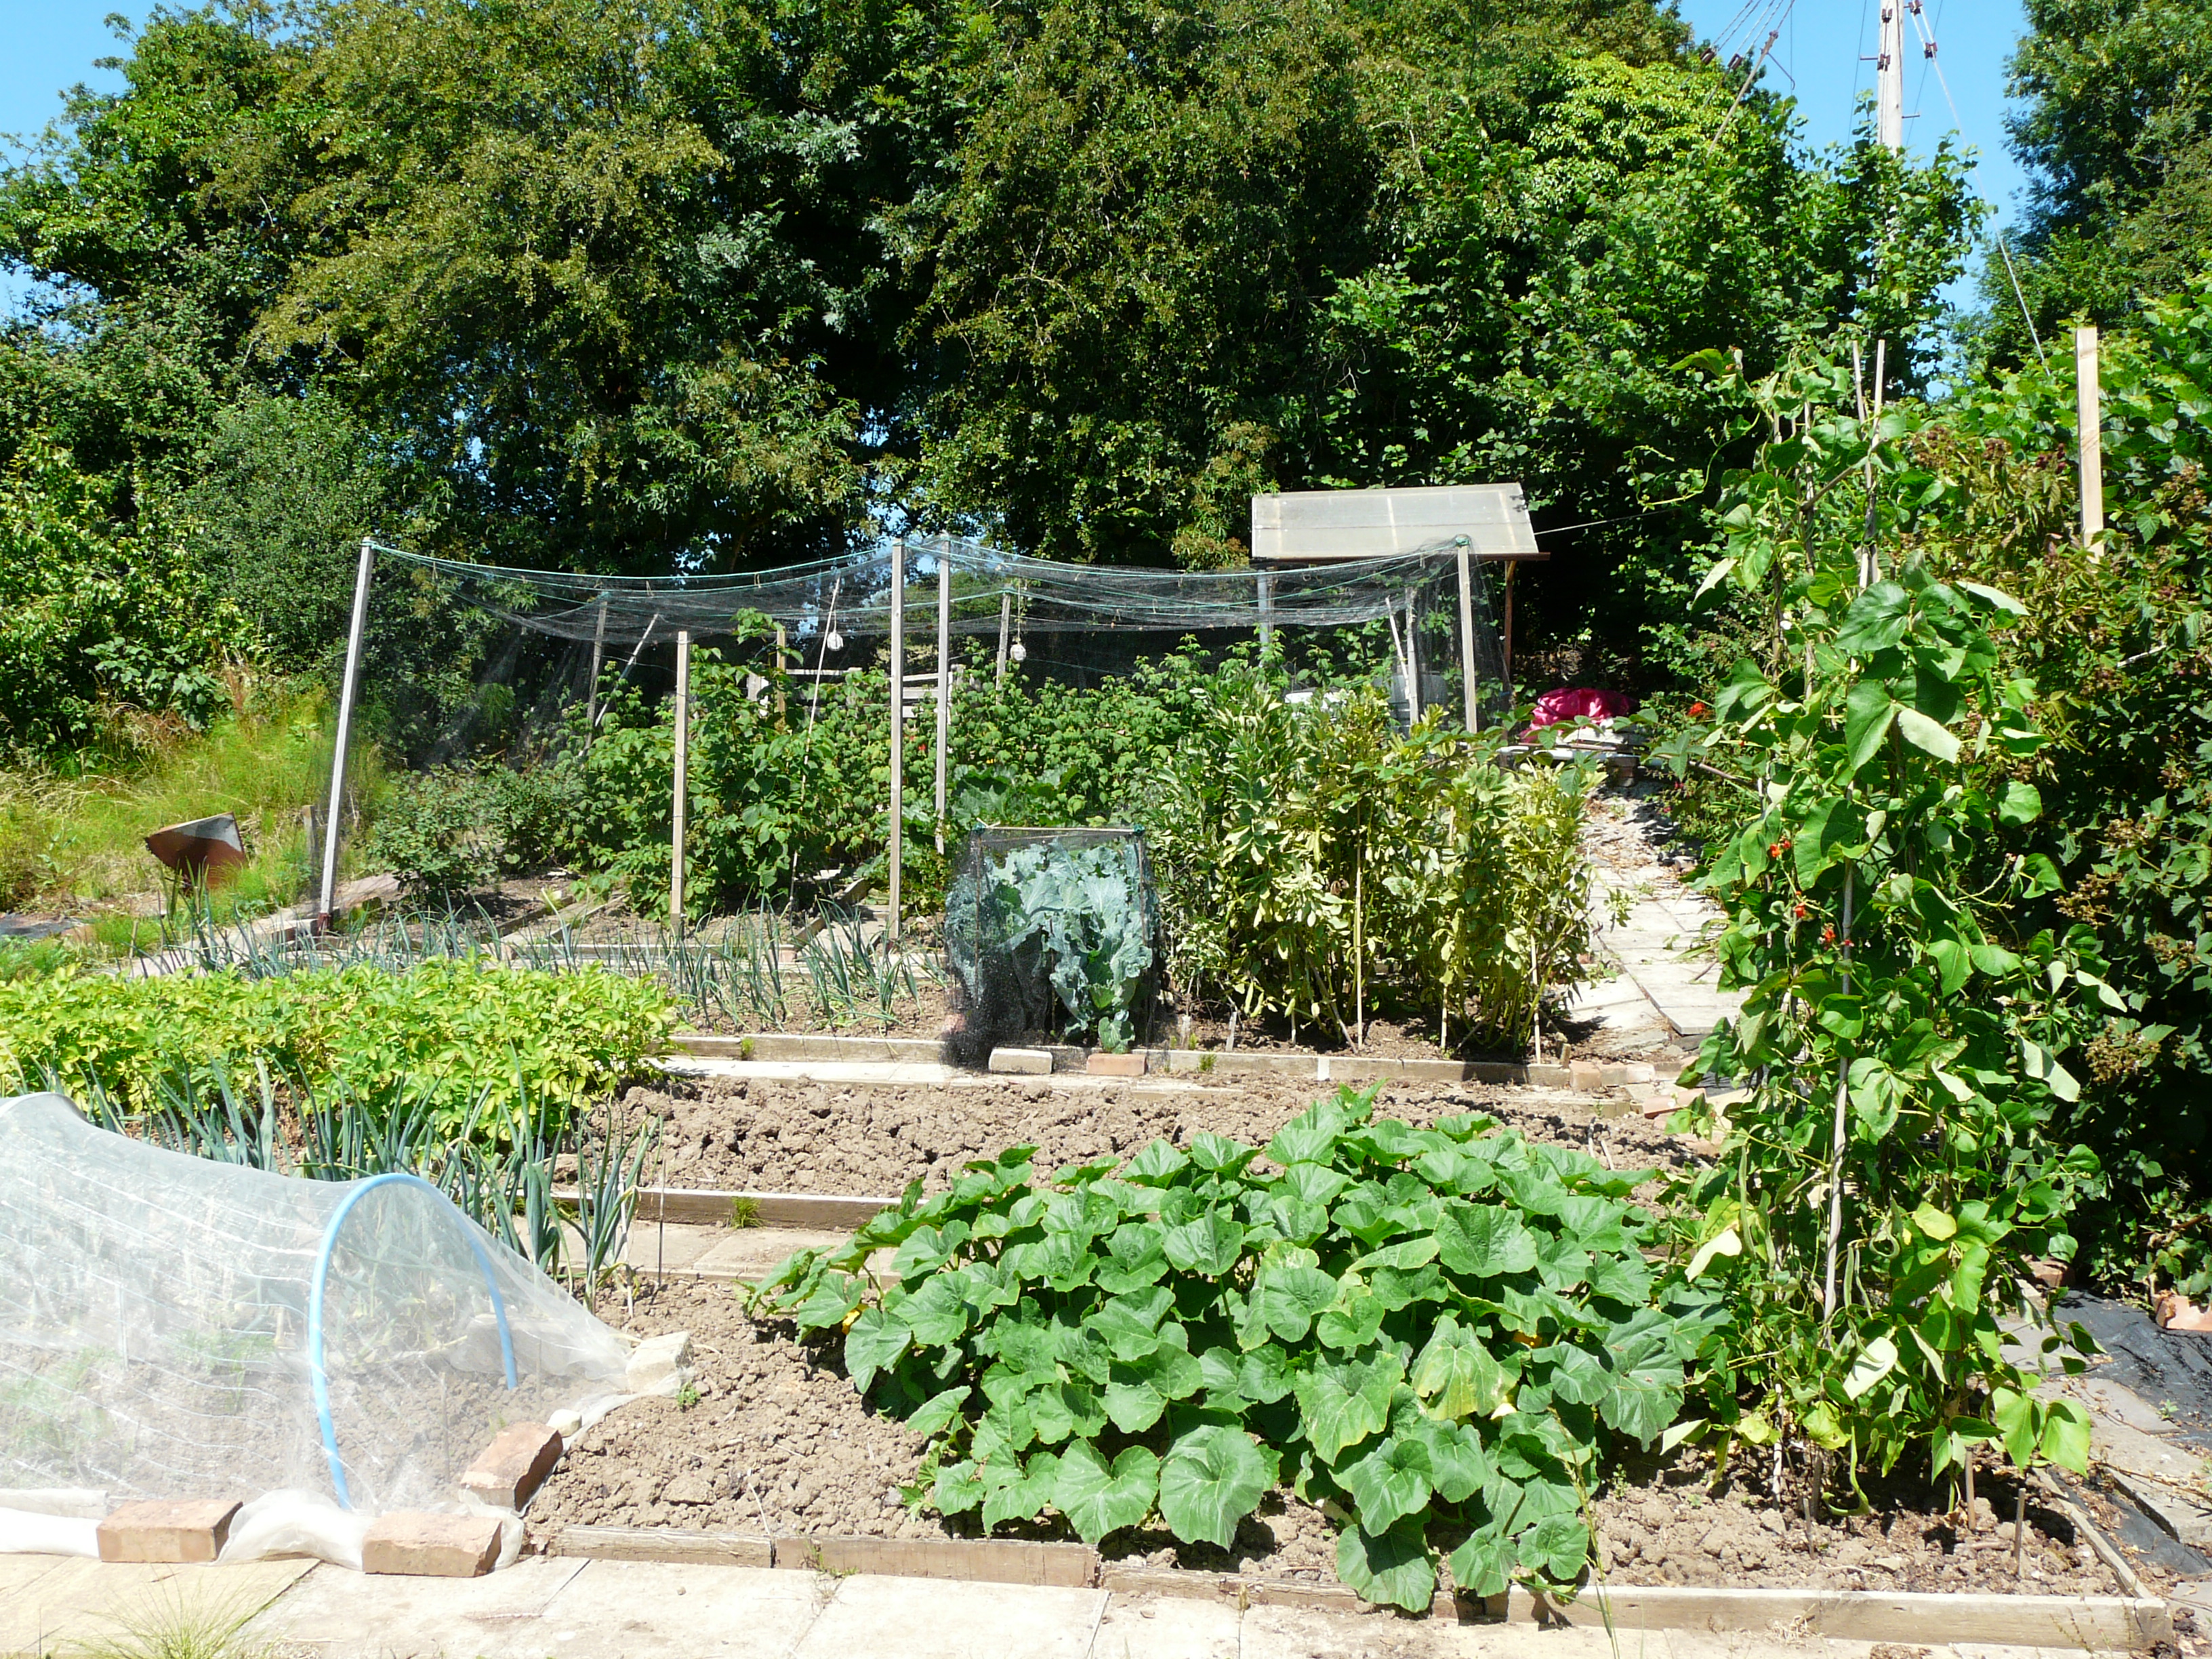 Peterston Allotments